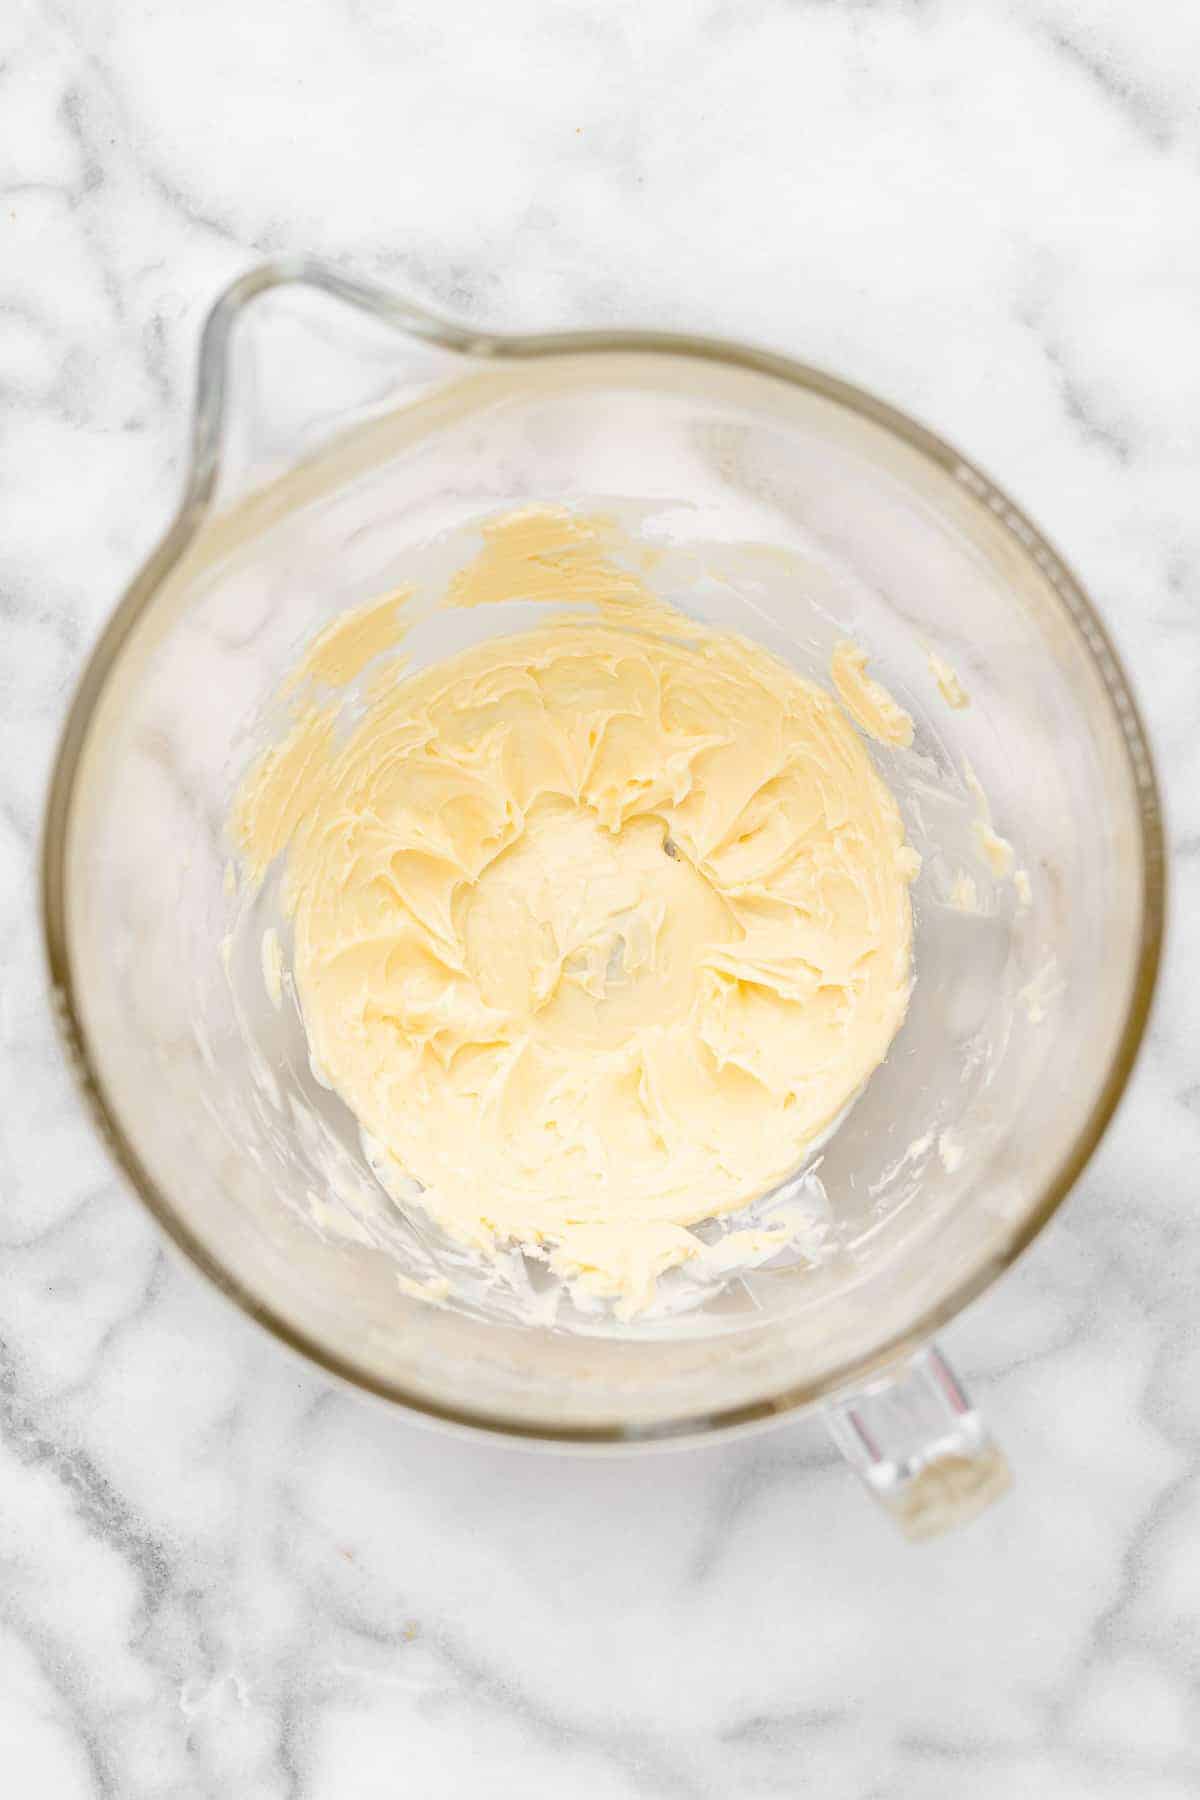 Butter creamed in mixing bowl